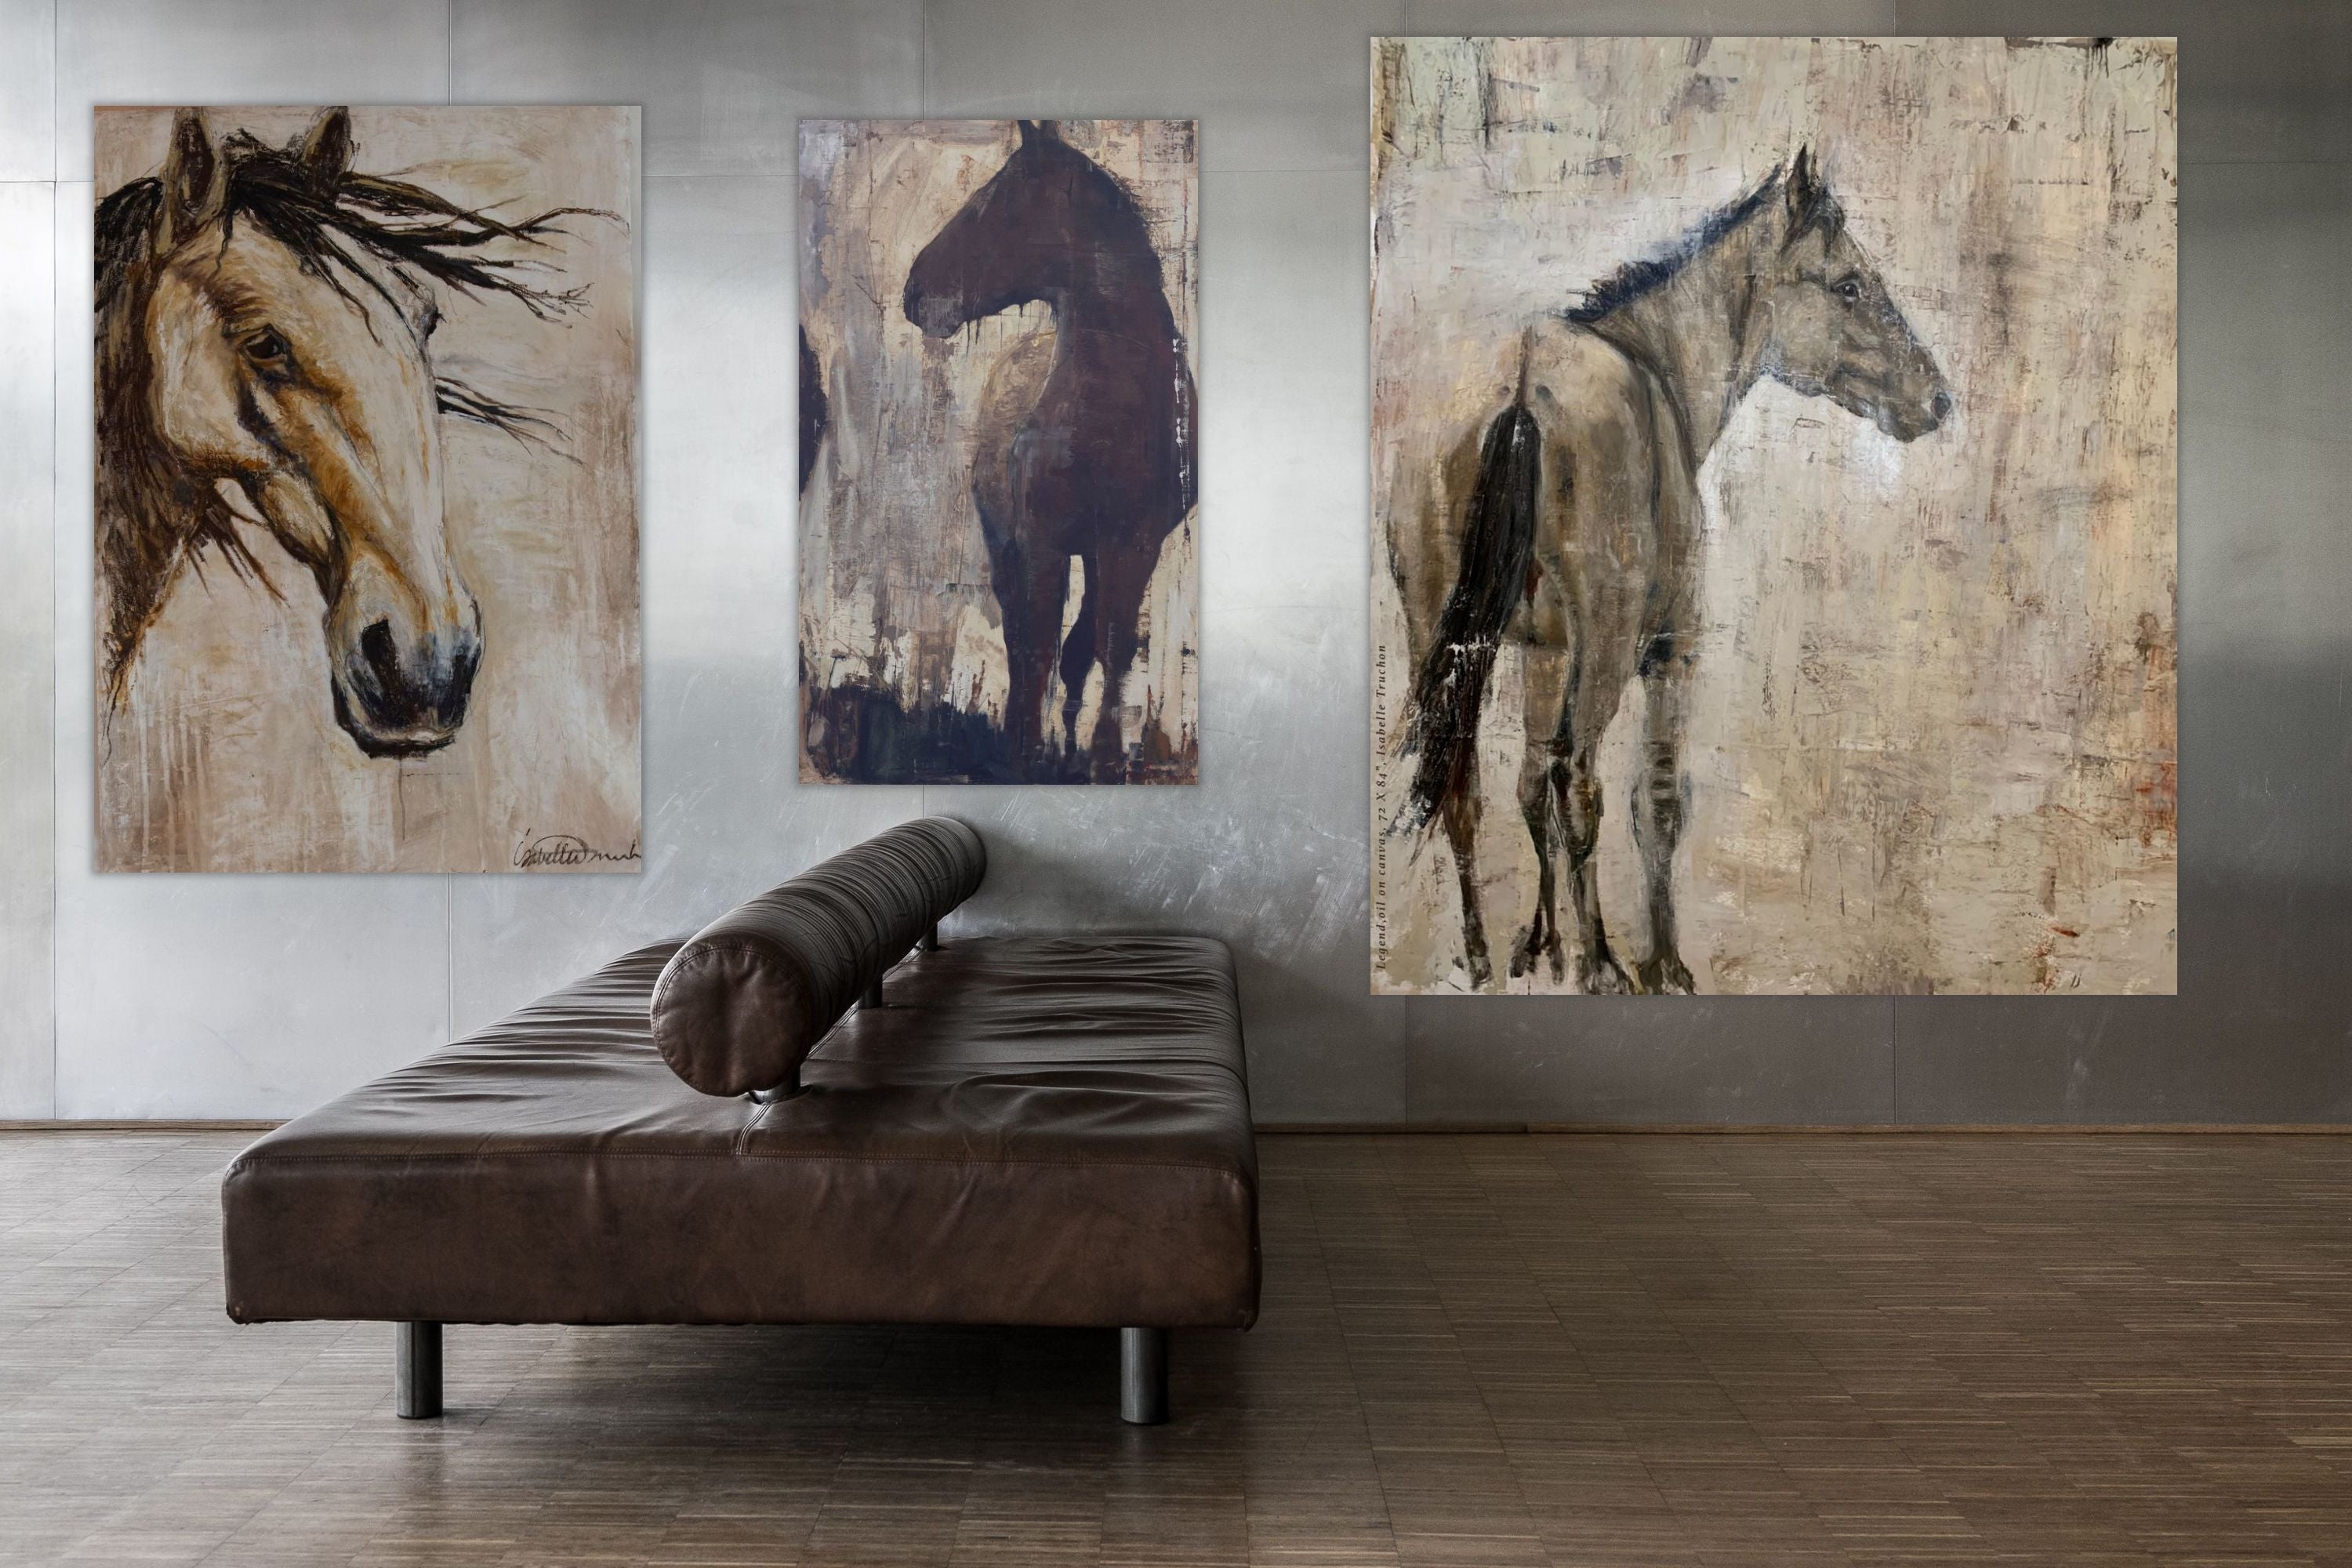 A moment of reflection for this wild mustang stallion. Or perhaps, he simply allows me to observe him, as he looks on at his herd nearby. A showpiece for any wall in your home or office.